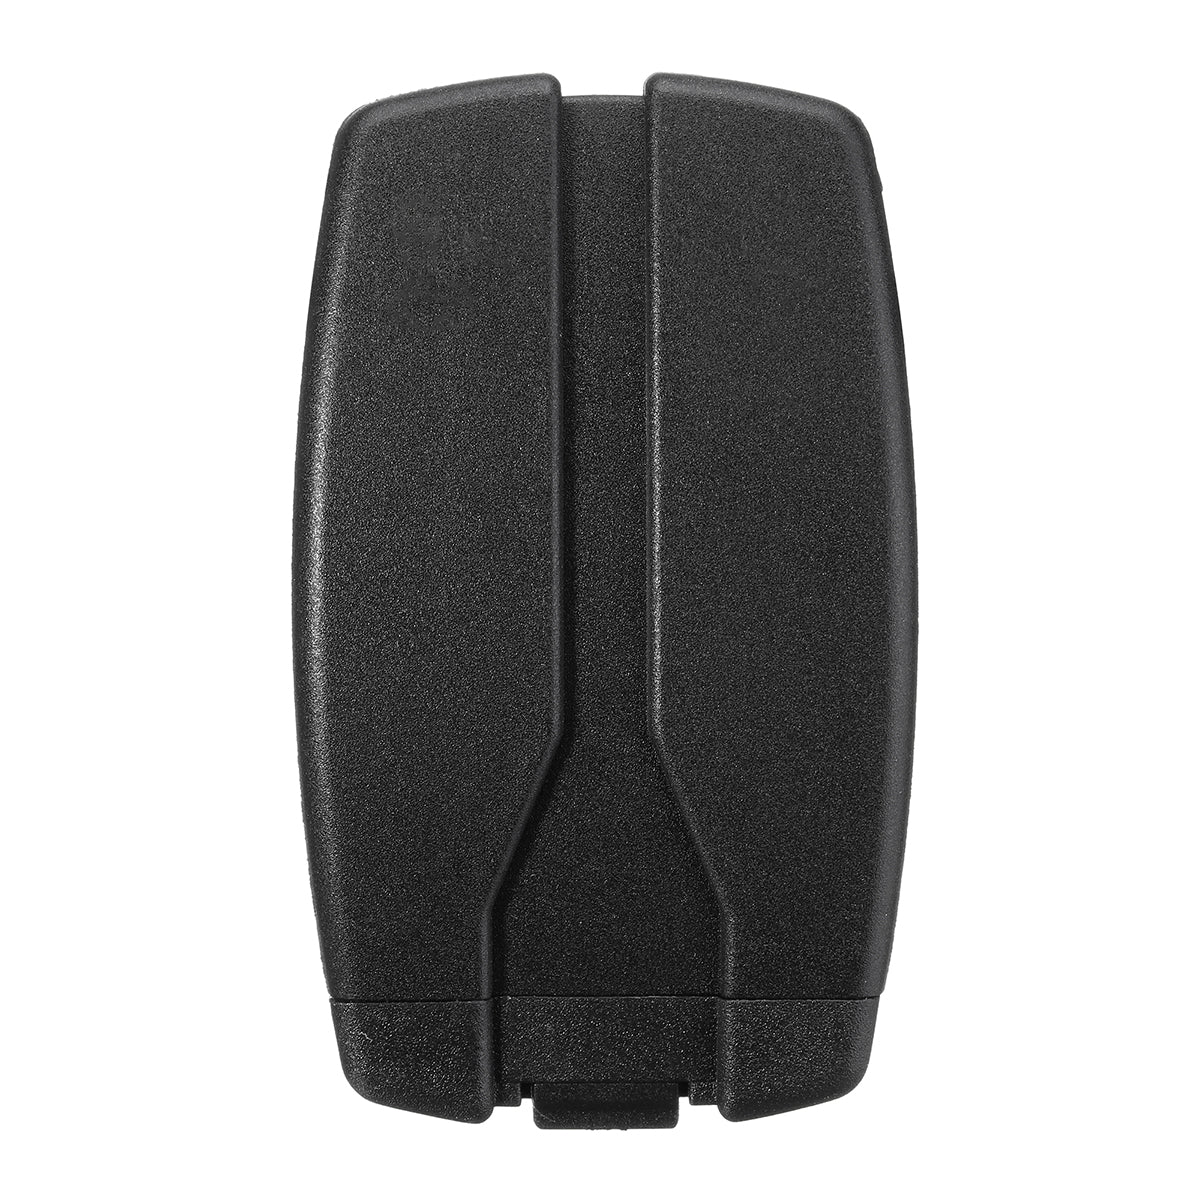 5 Buttons Remote Smart Key Fob Case Shell For Land Rover Freelander 2 - Auto GoShop